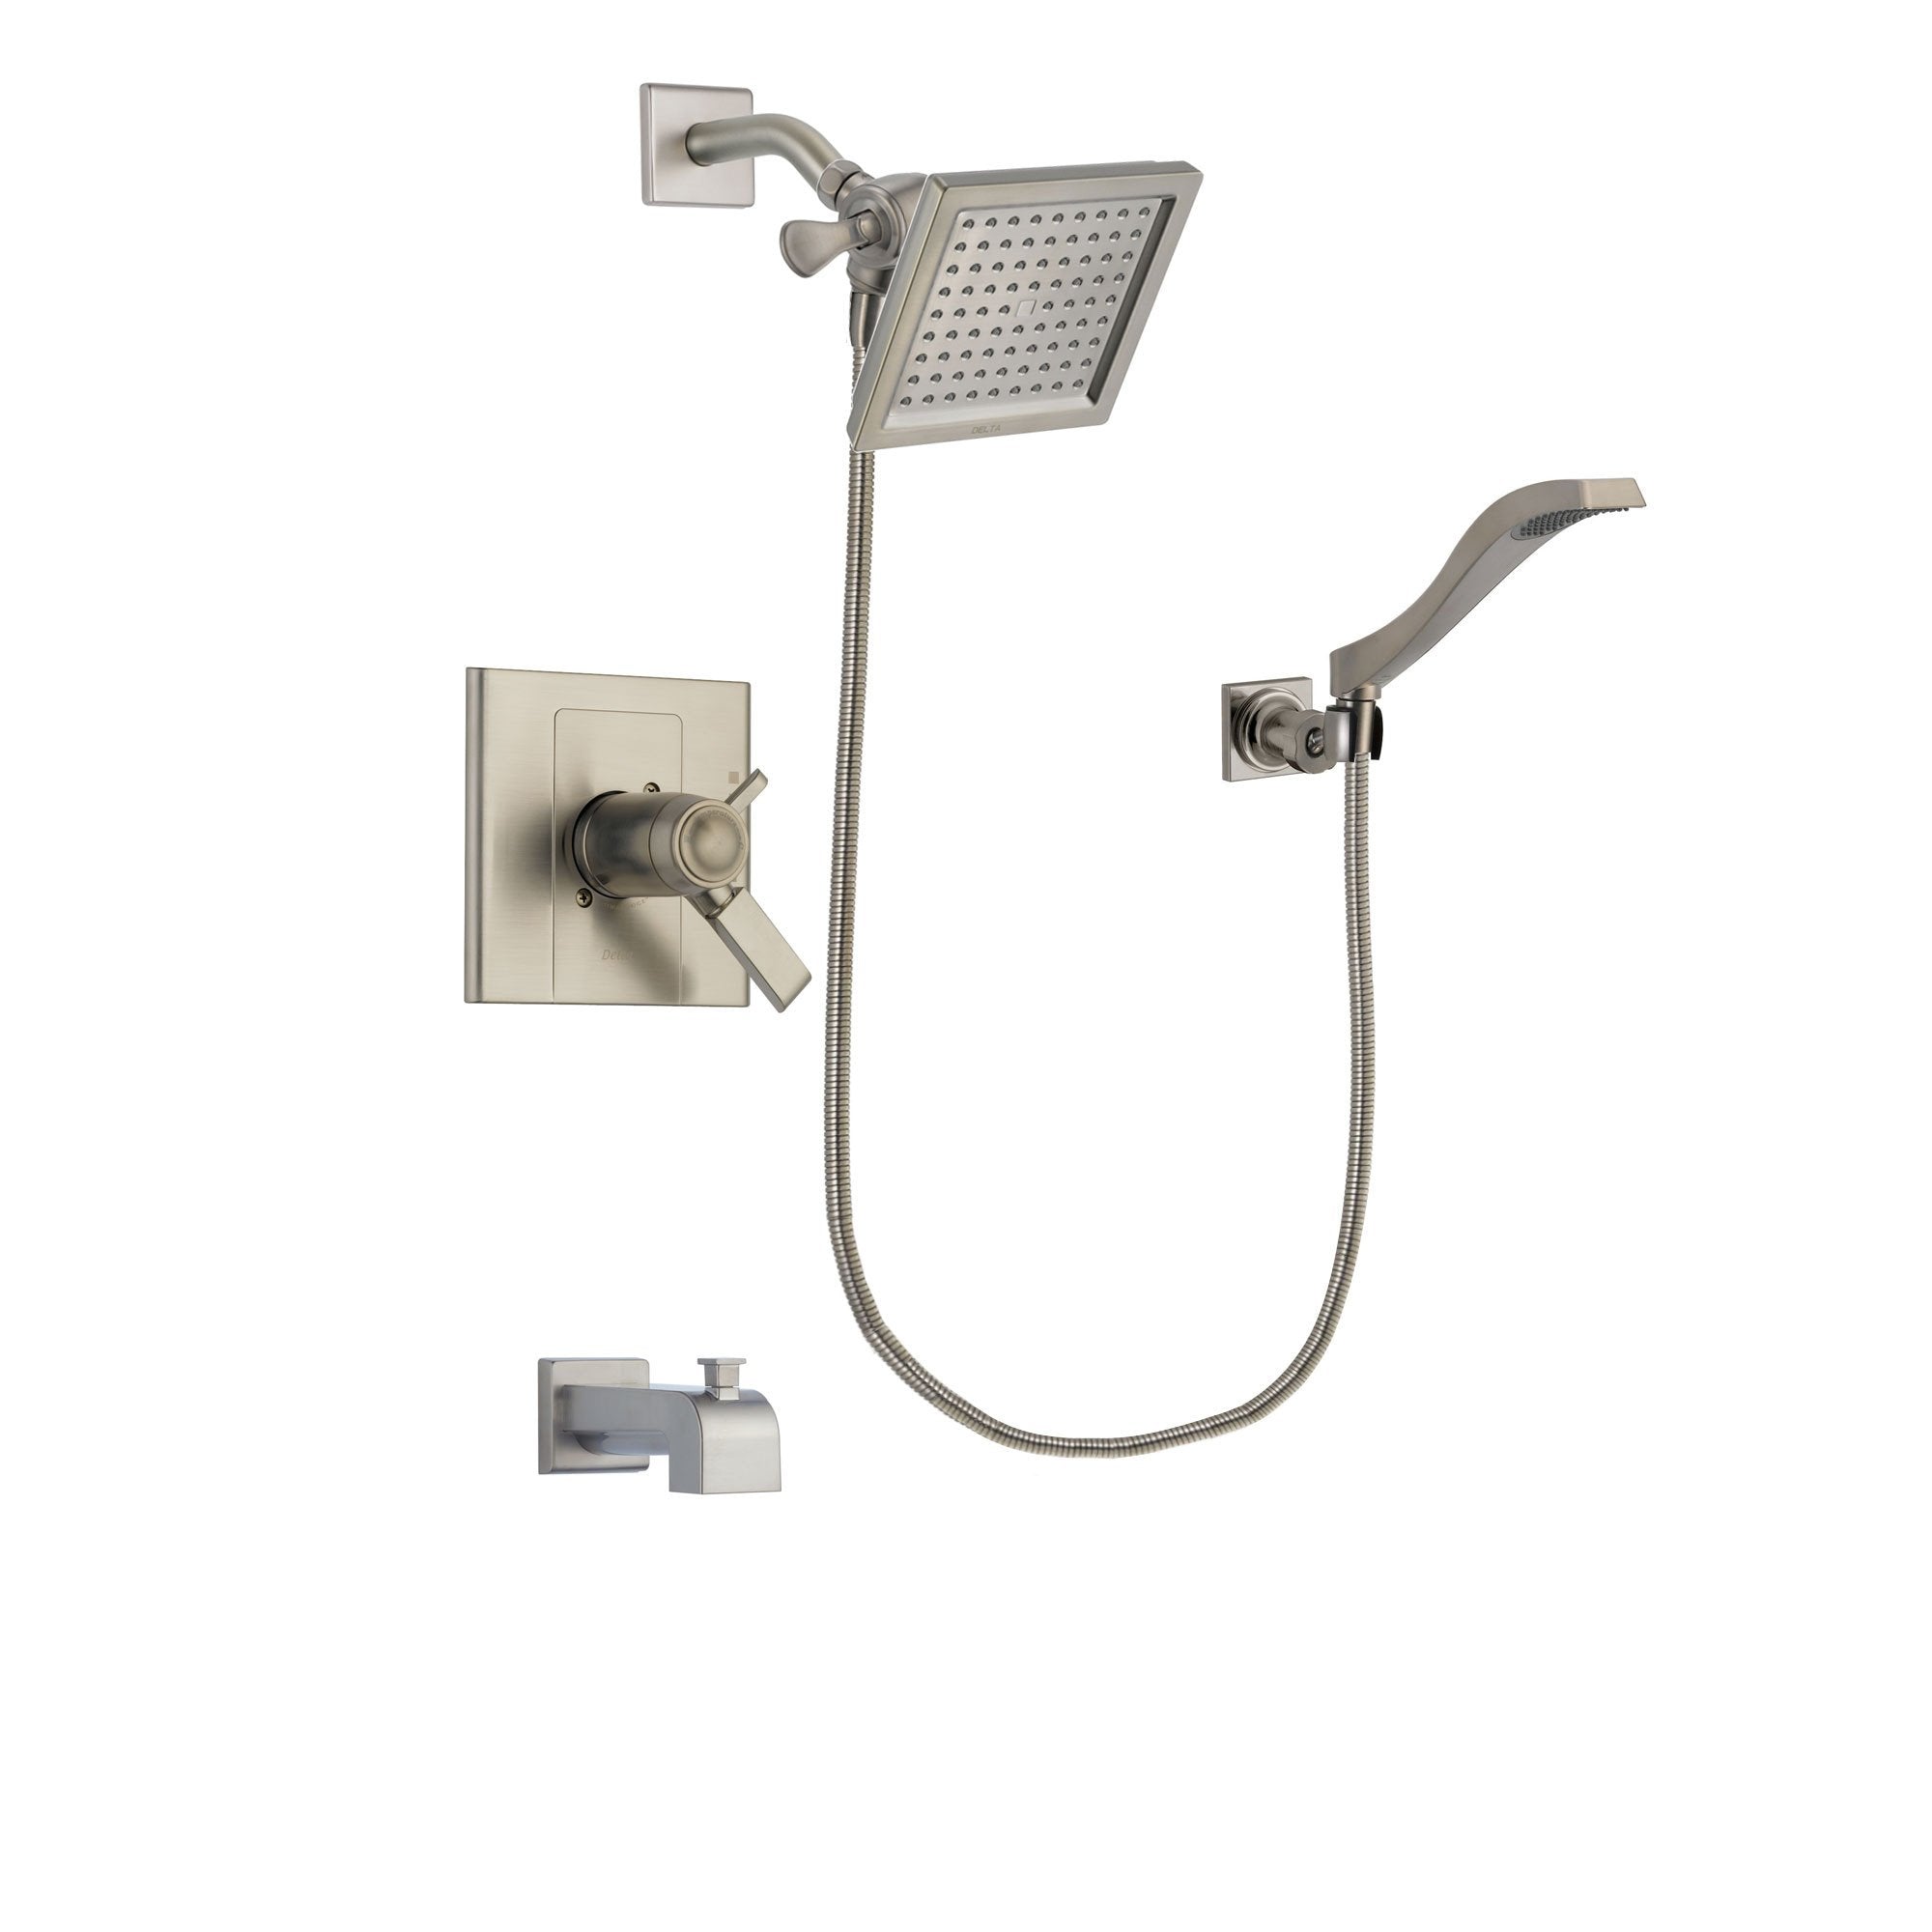 Delta Arzo Stainless Steel Finish Thermostatic Tub and Shower Faucet System Package with 6.5-inch Square Rain Showerhead and Modern Wall Mount Handheld Shower Spray Includes Rough-in Valve and Tub Spout DSP2079V